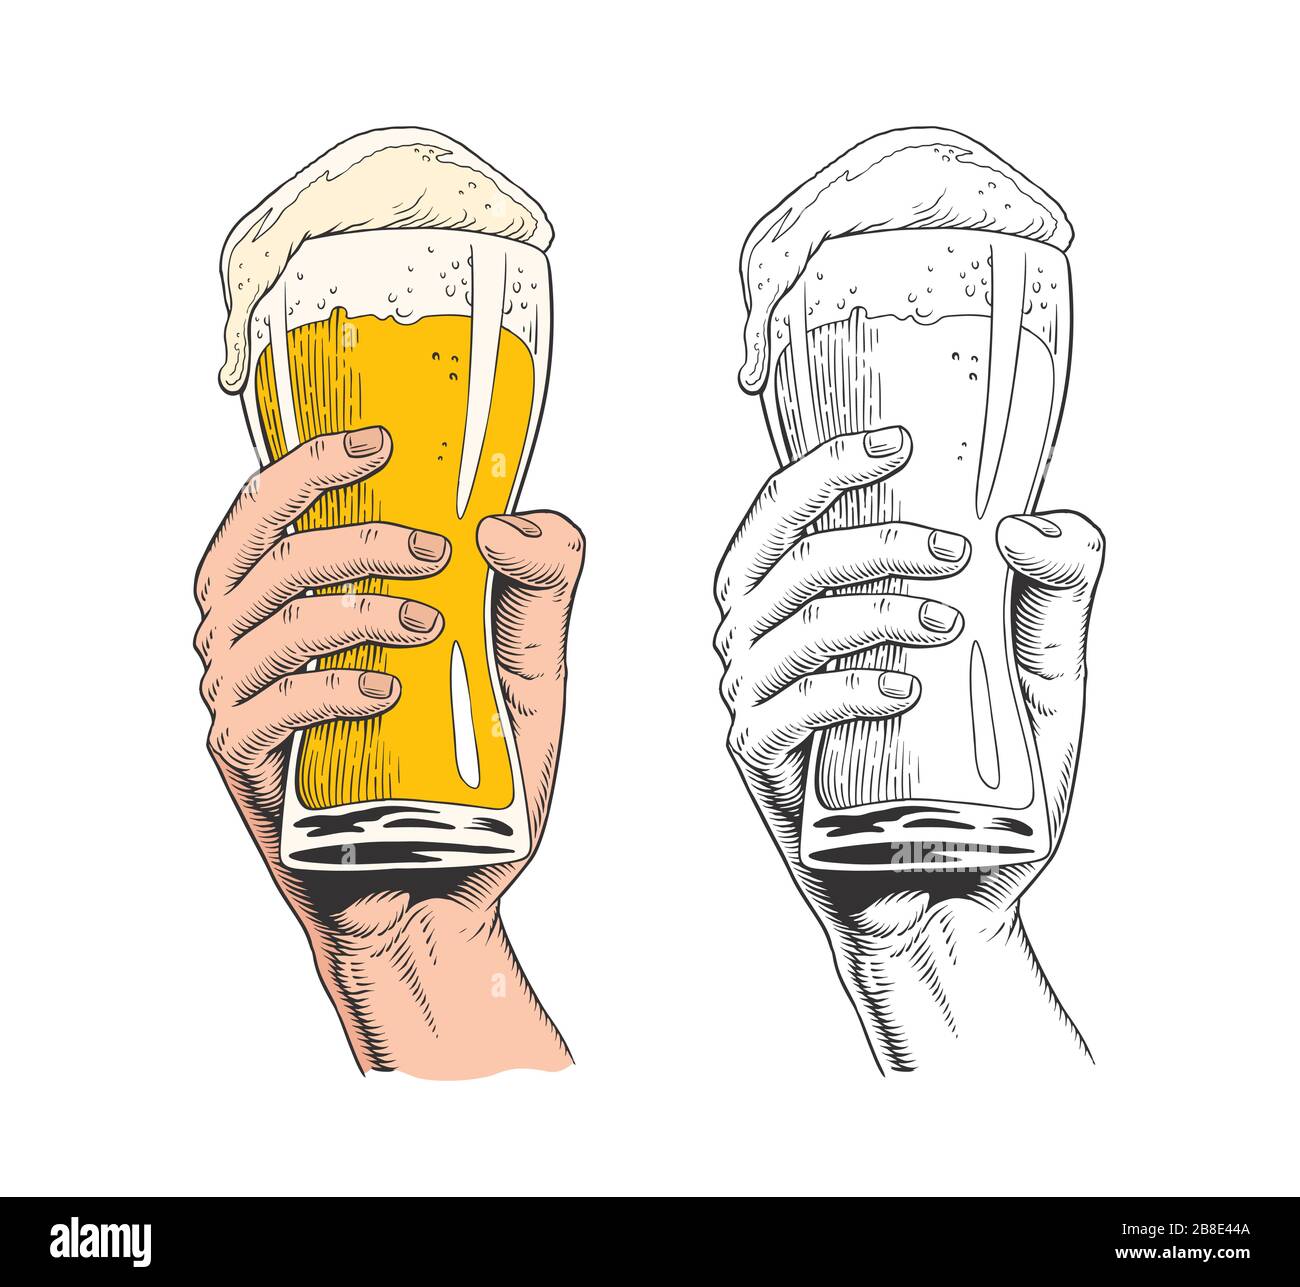 Hand holding a beer glass or pint. Vintage engraving style vector illustration. Stock Vector